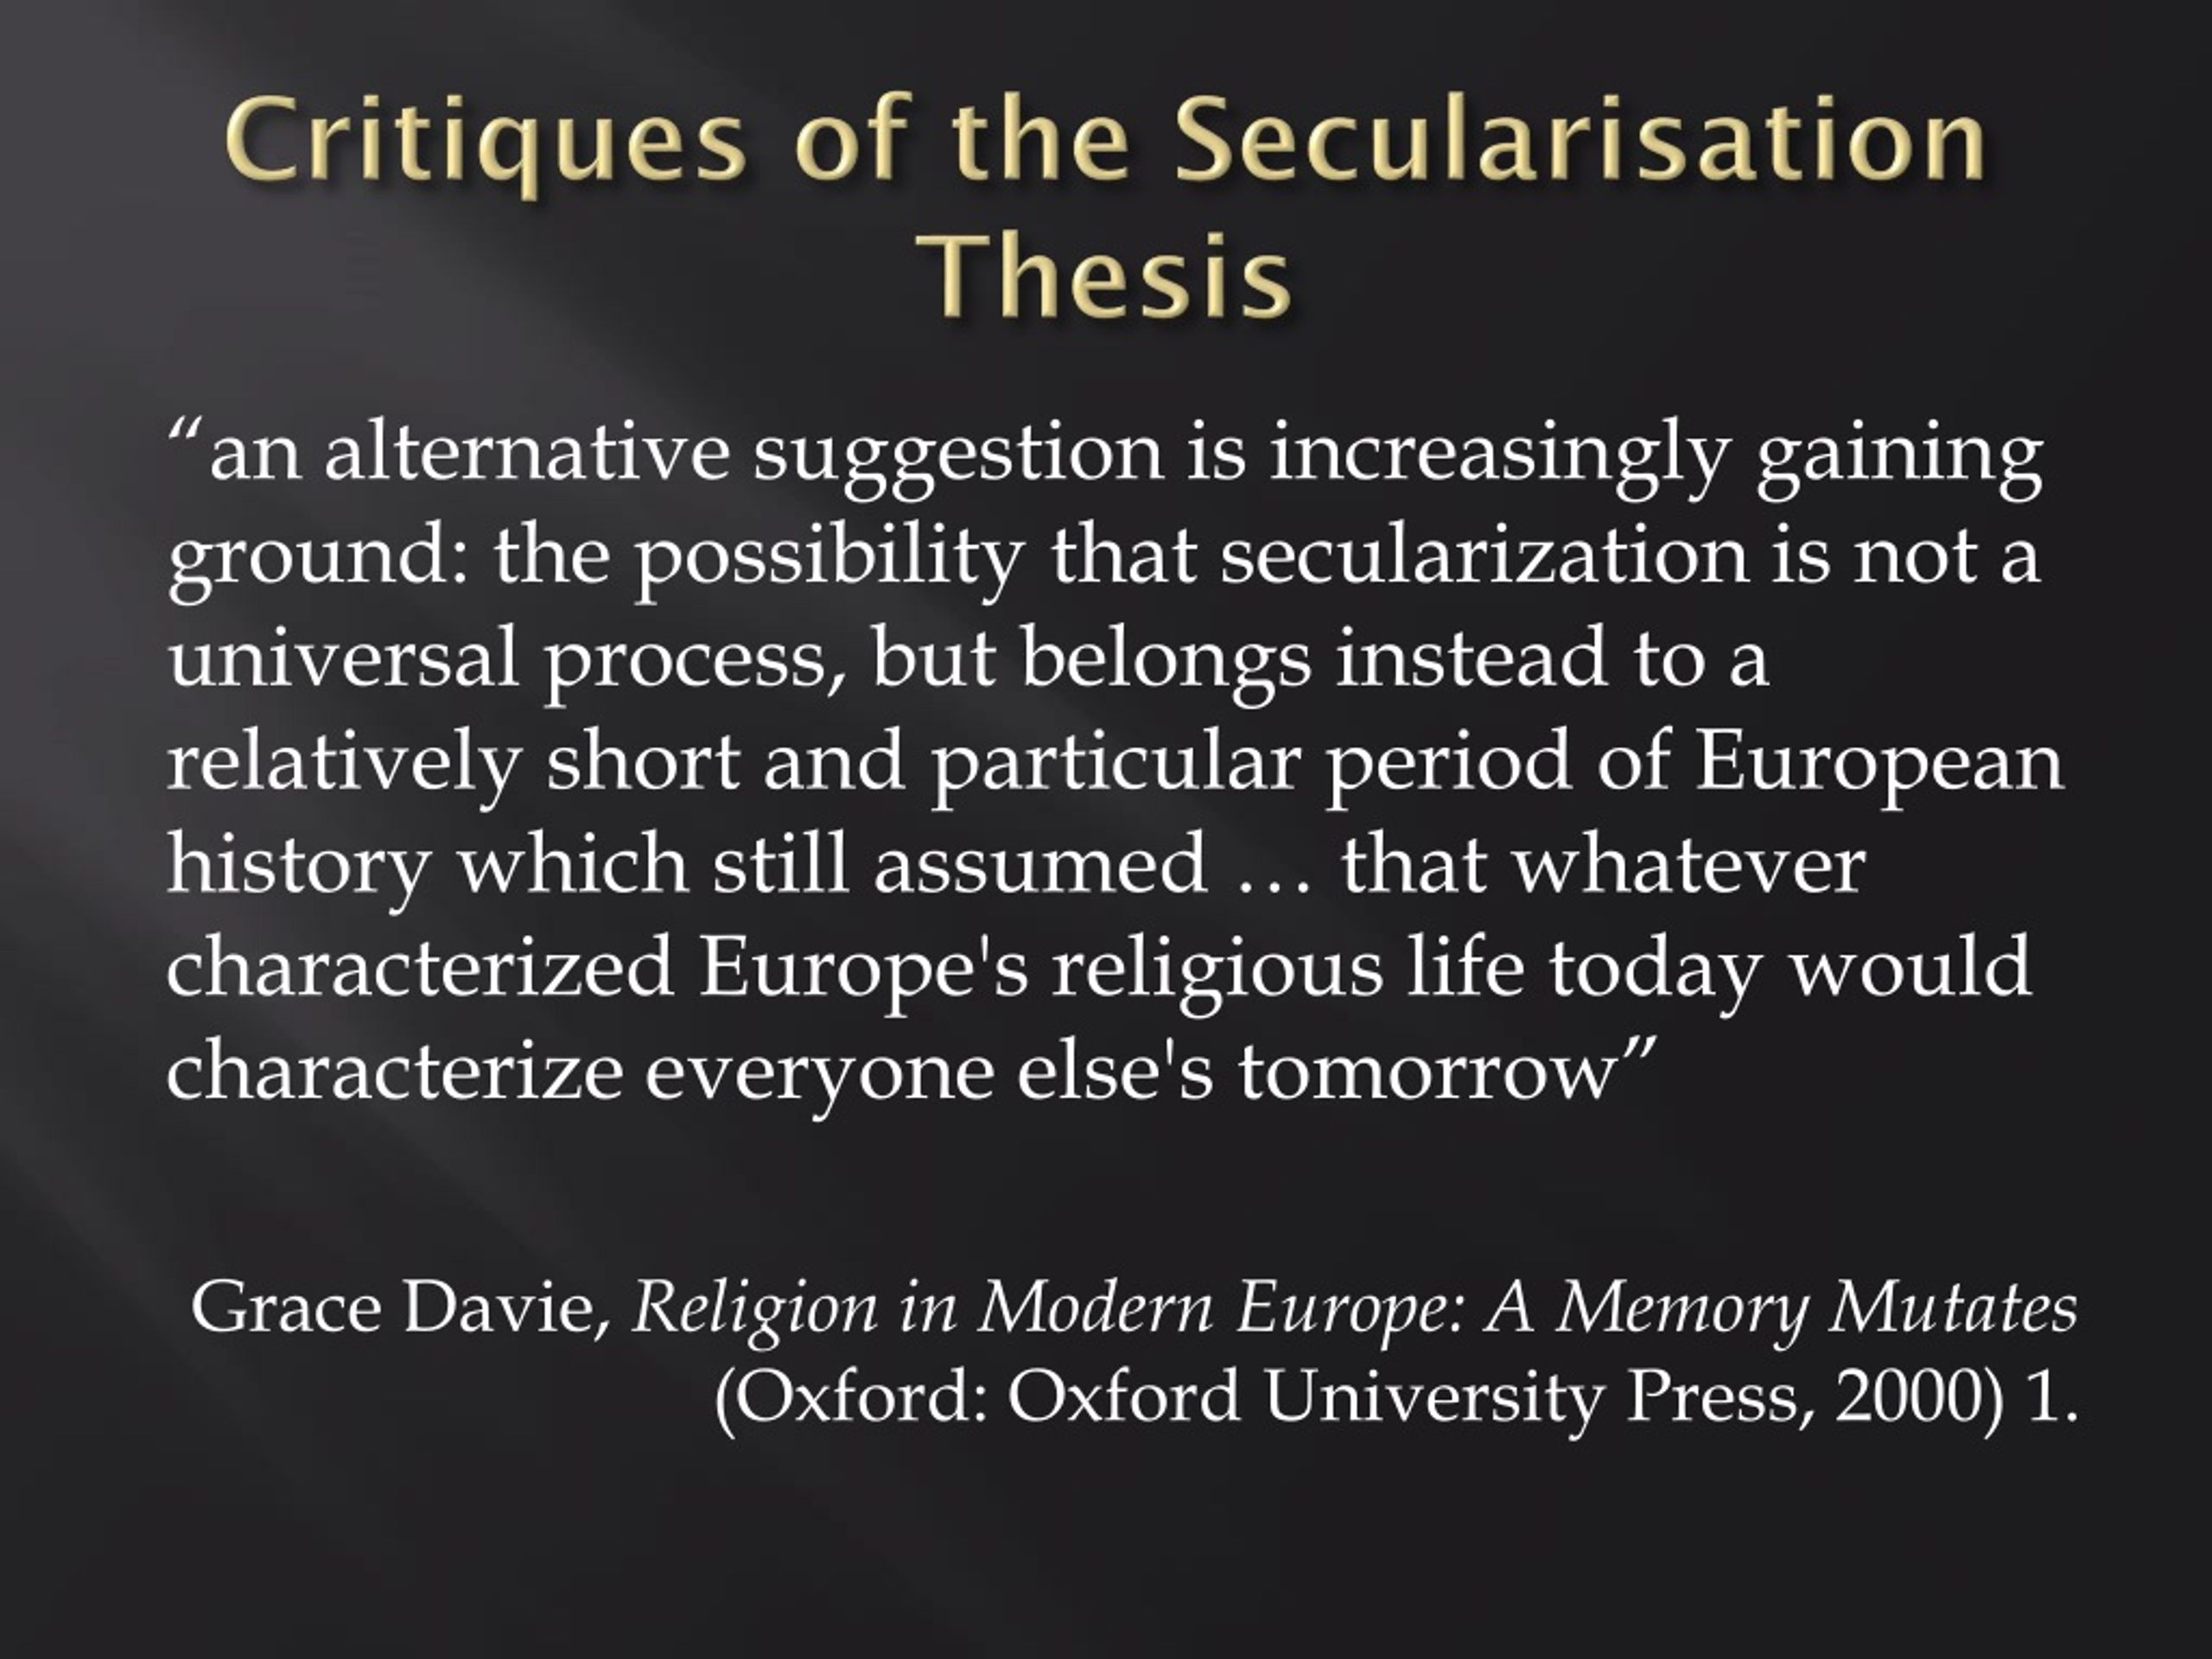 thesis of secularization